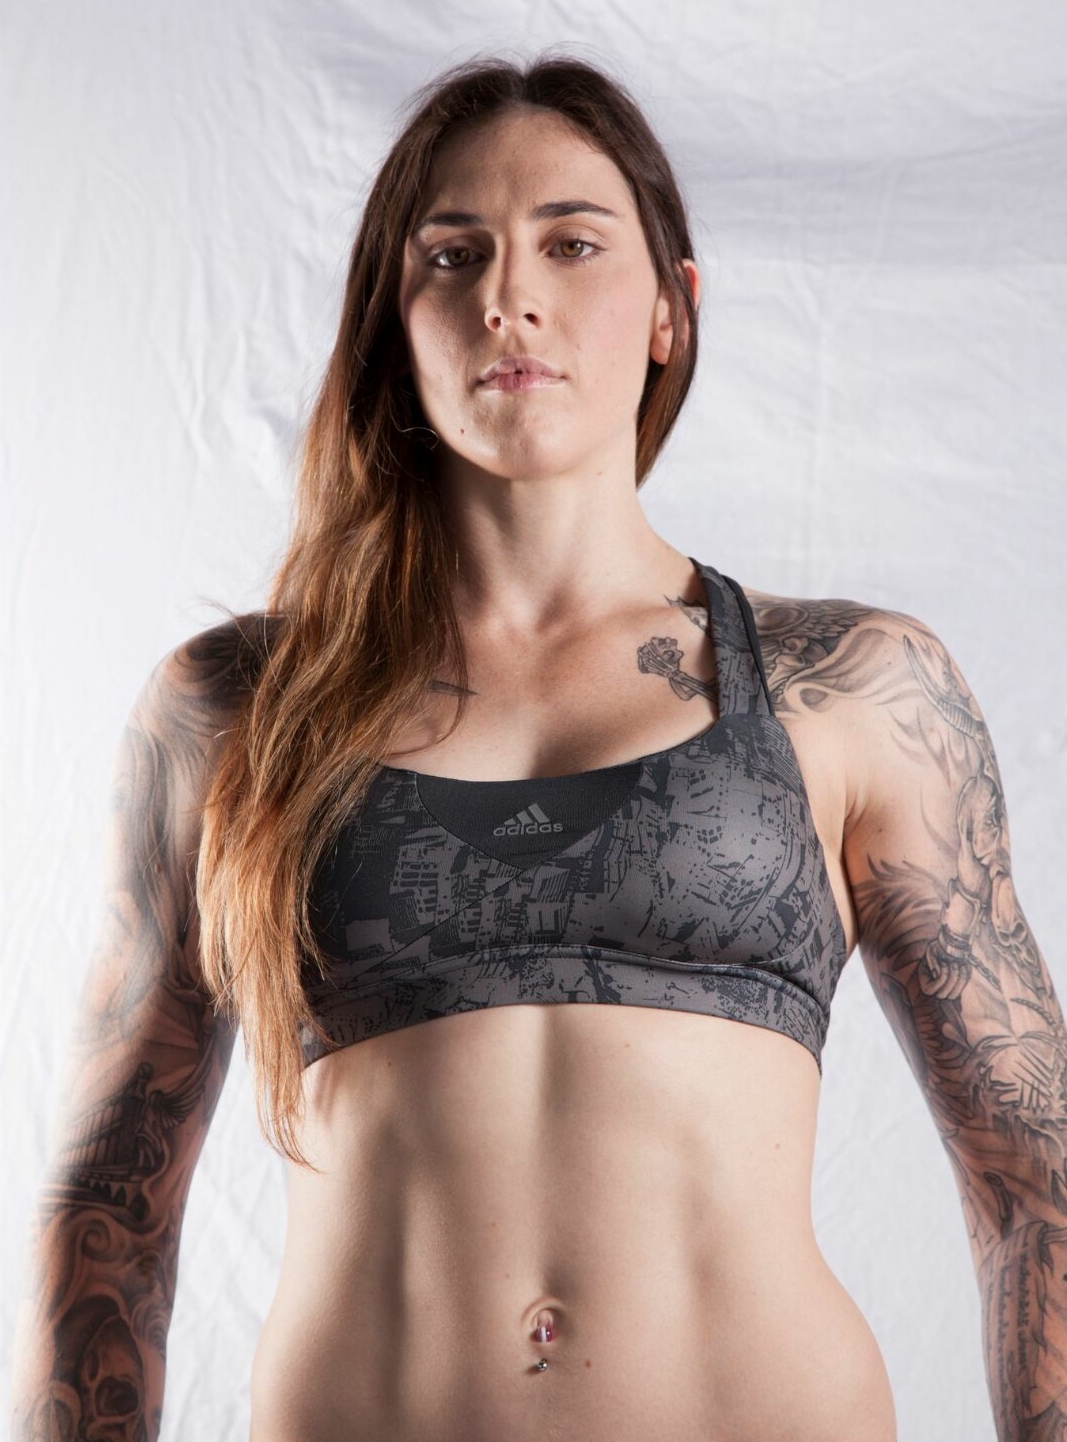 Megan Anderson's physical appearance